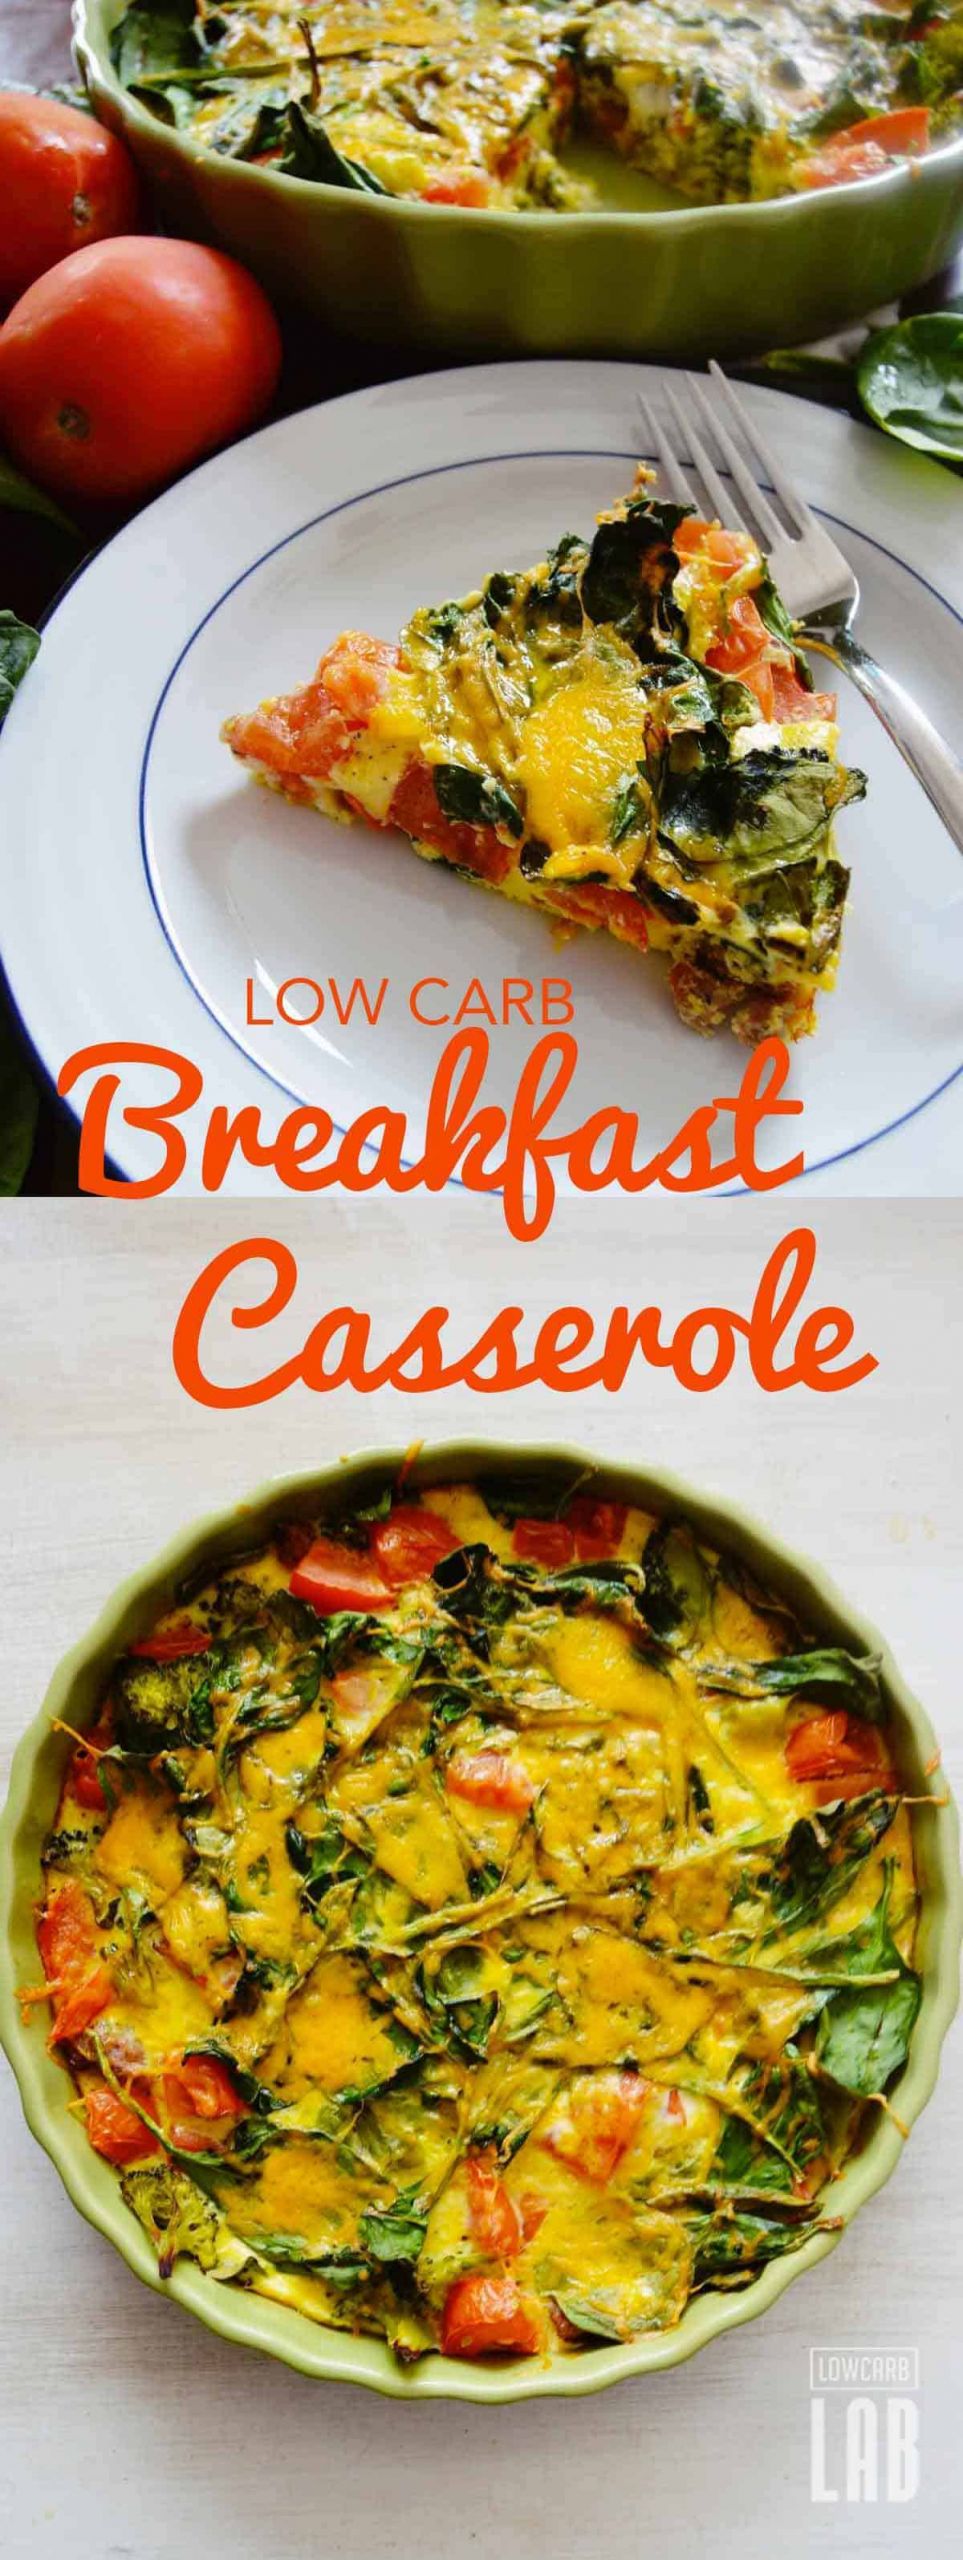 Low Carb Brunch Recipes
 Delicious Low Carb Breakfast Casserole Recipe